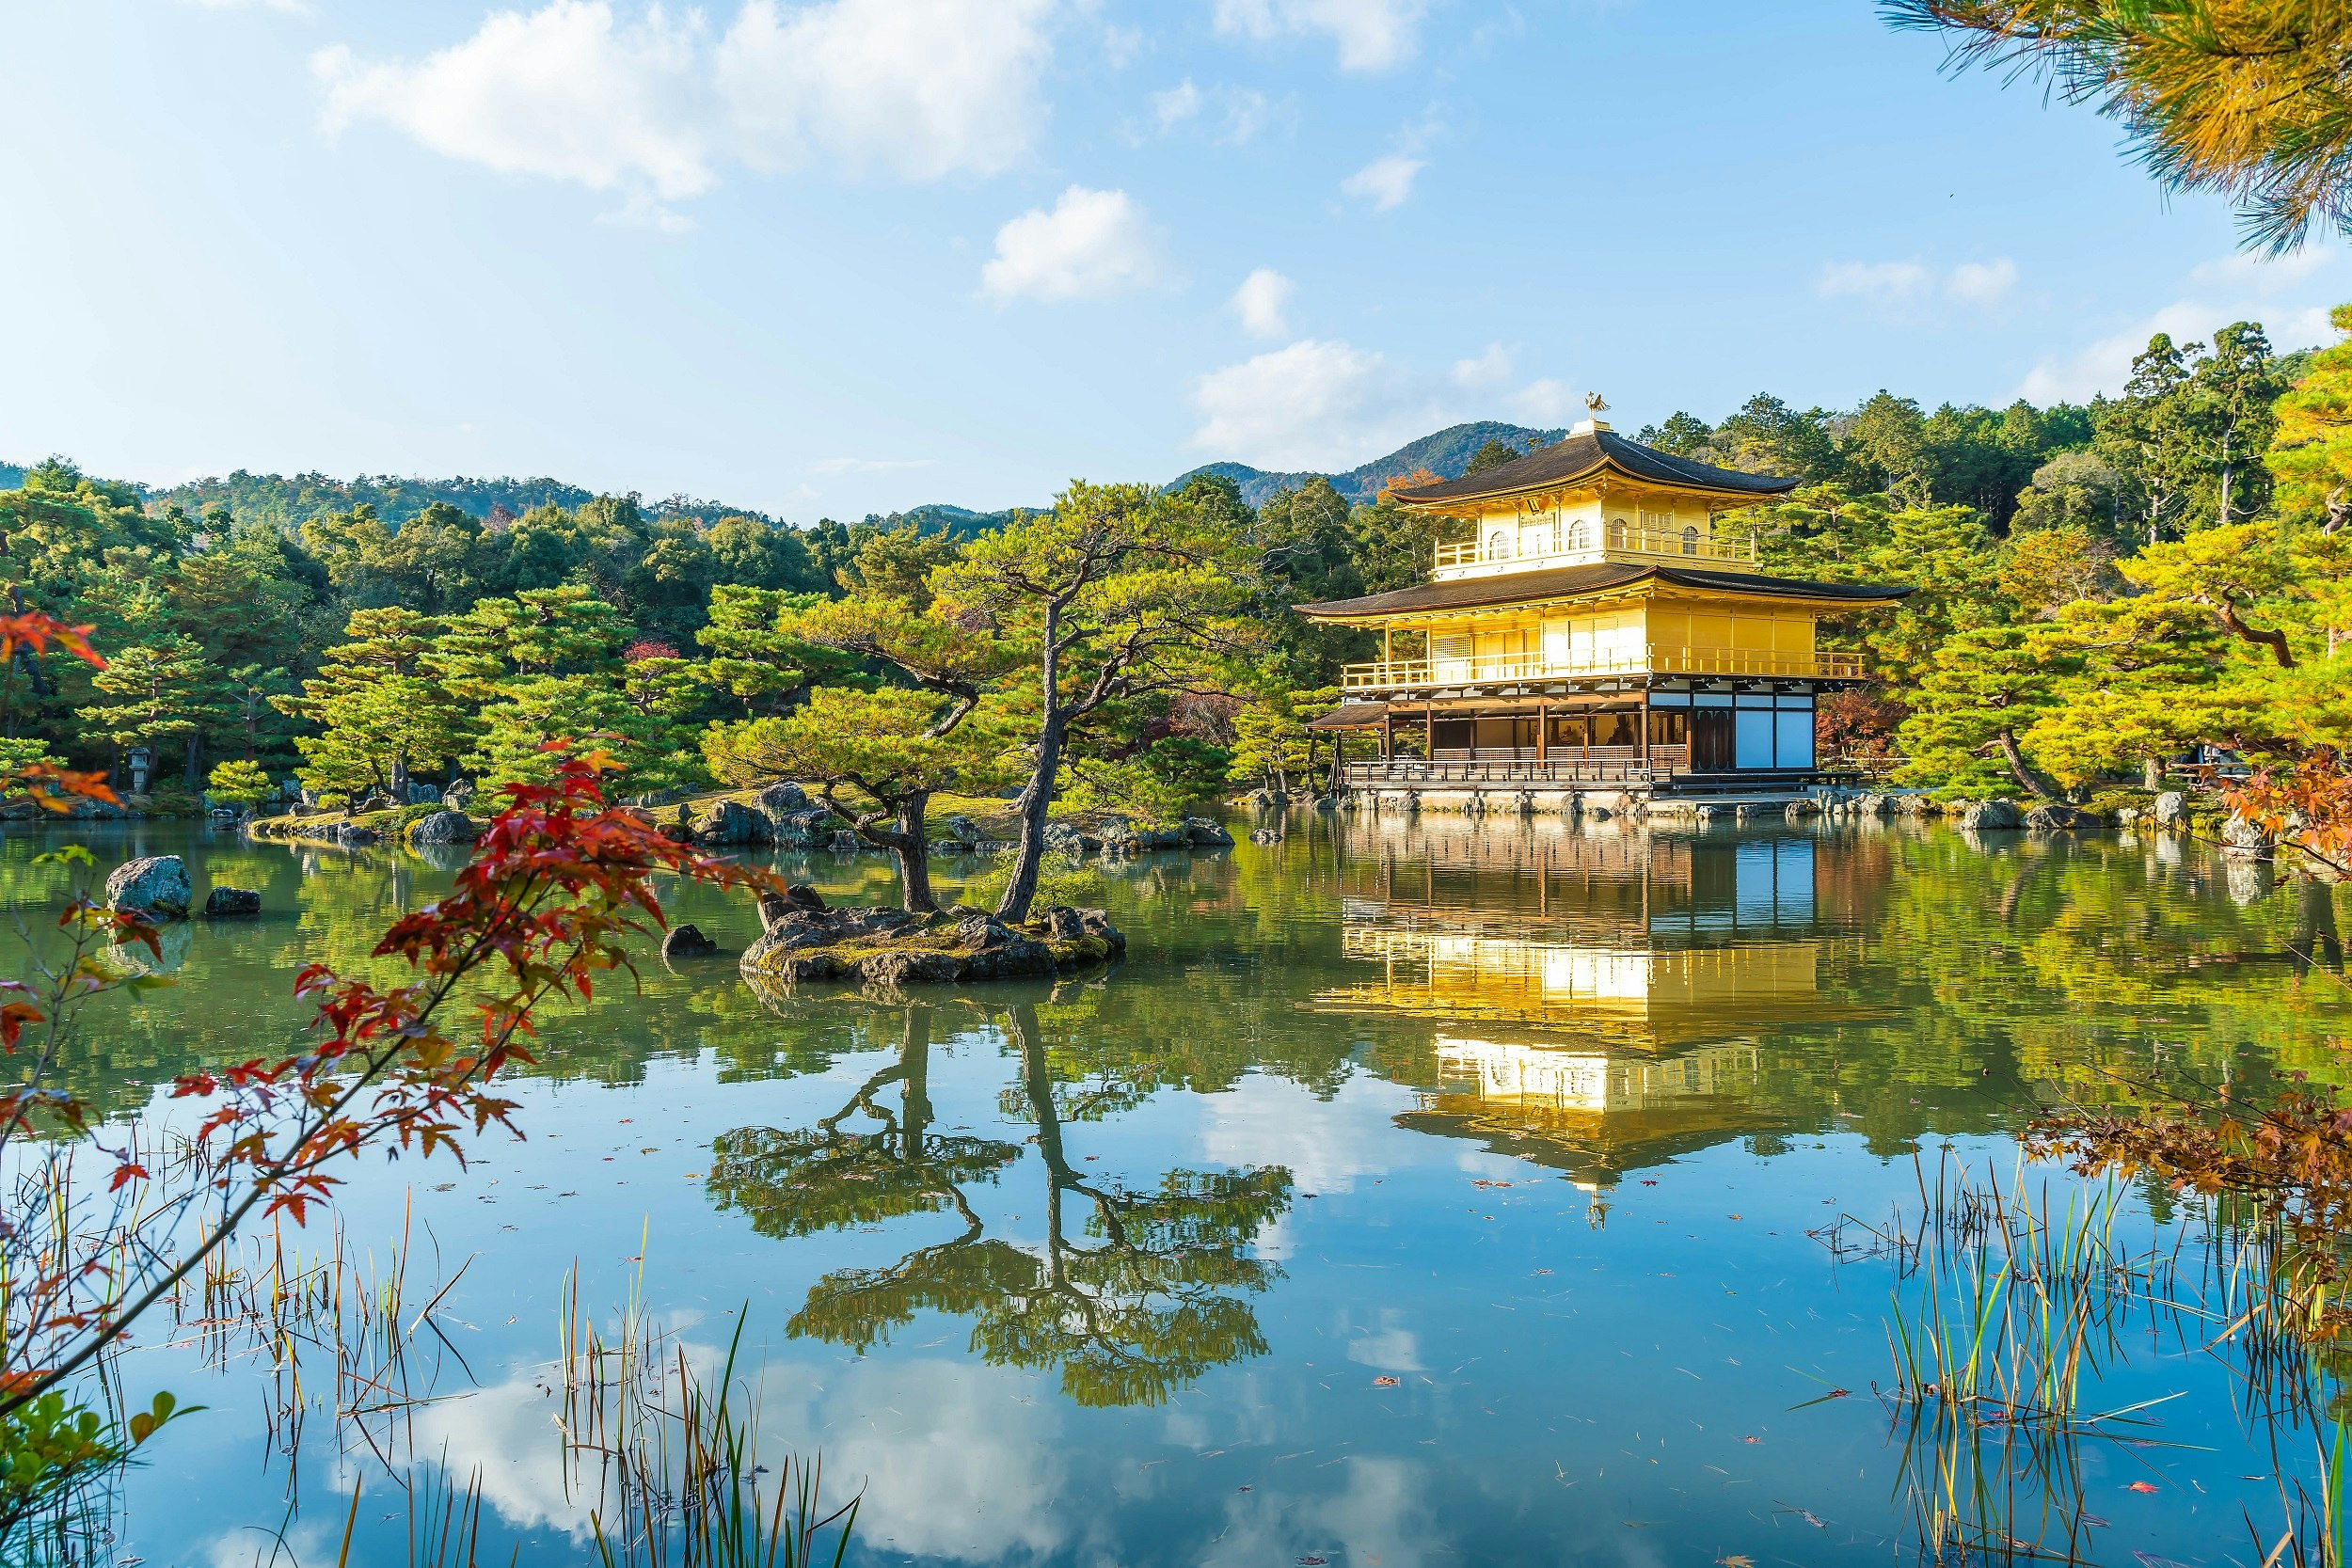 Beautiful Architecture at Kinkaku-ji (The Golden Pavilion) reflected in a lake in Kyoto, Japan; bordering the lake is a dense forest, with blue skies above.